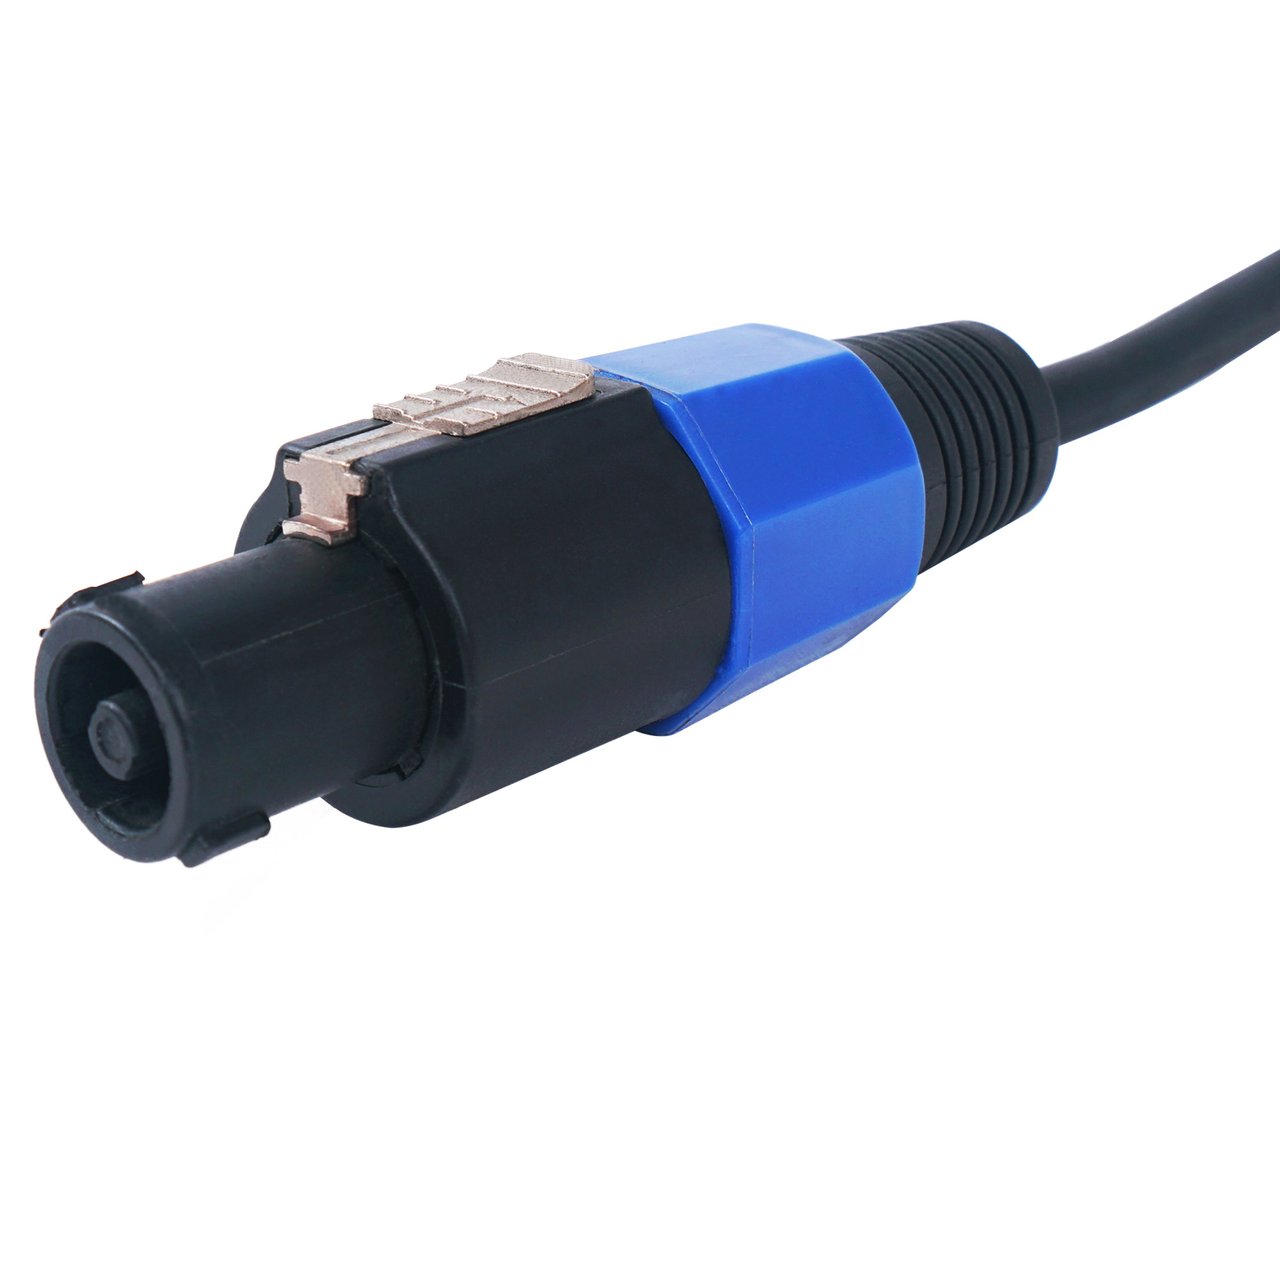 Sound Town Speakon to Speakon Speaker Cable, 50 Feet, 12 Gauge, 2 Conductor, Male to Male (STC-12NN50) - image 2 of 2